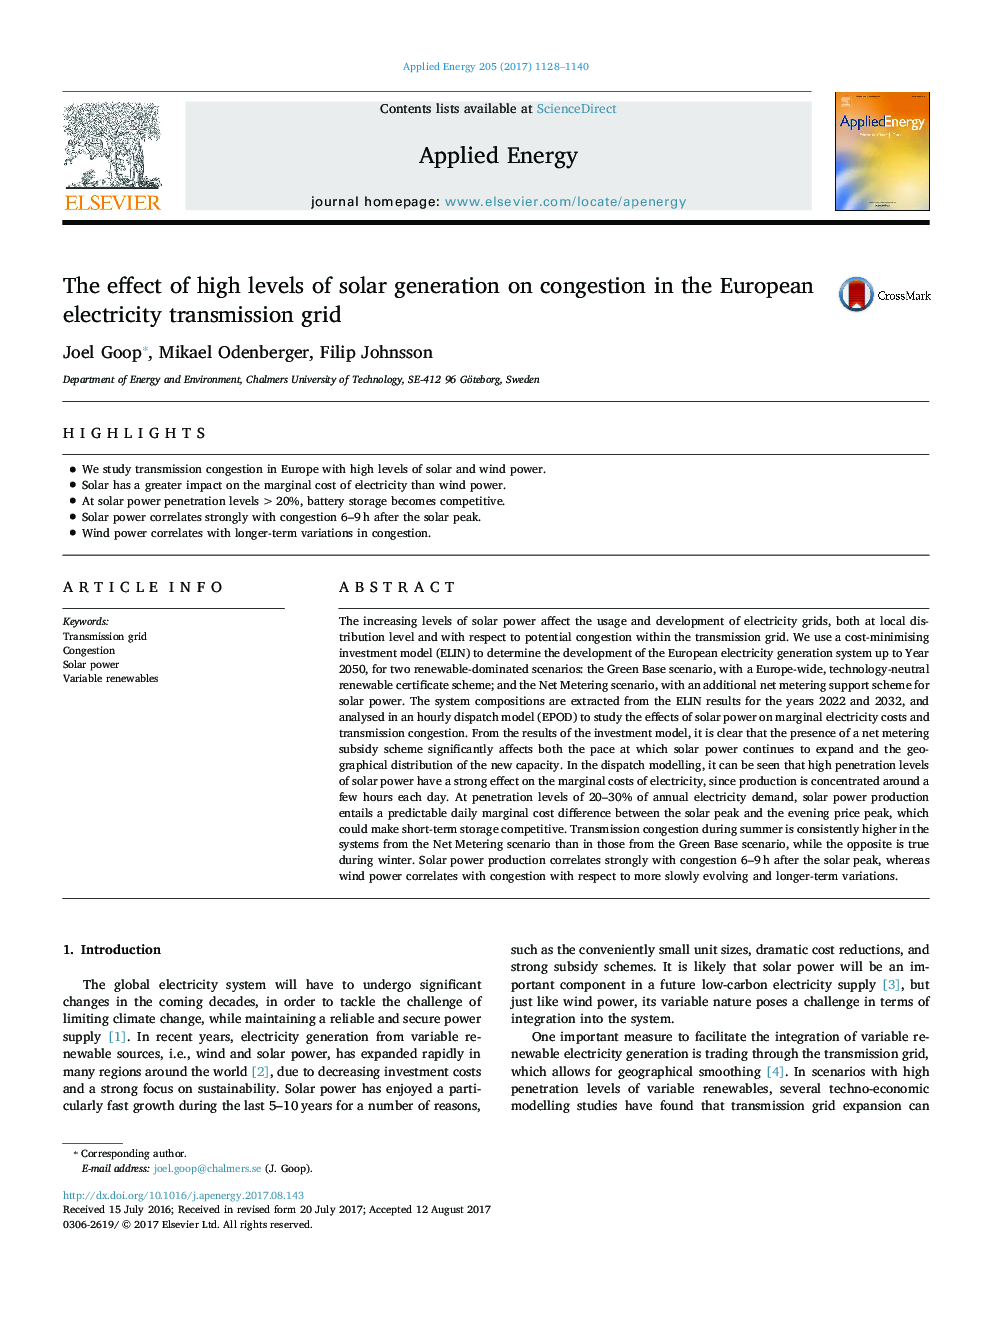 The effect of high levels of solar generation on congestion in the European electricity transmission grid